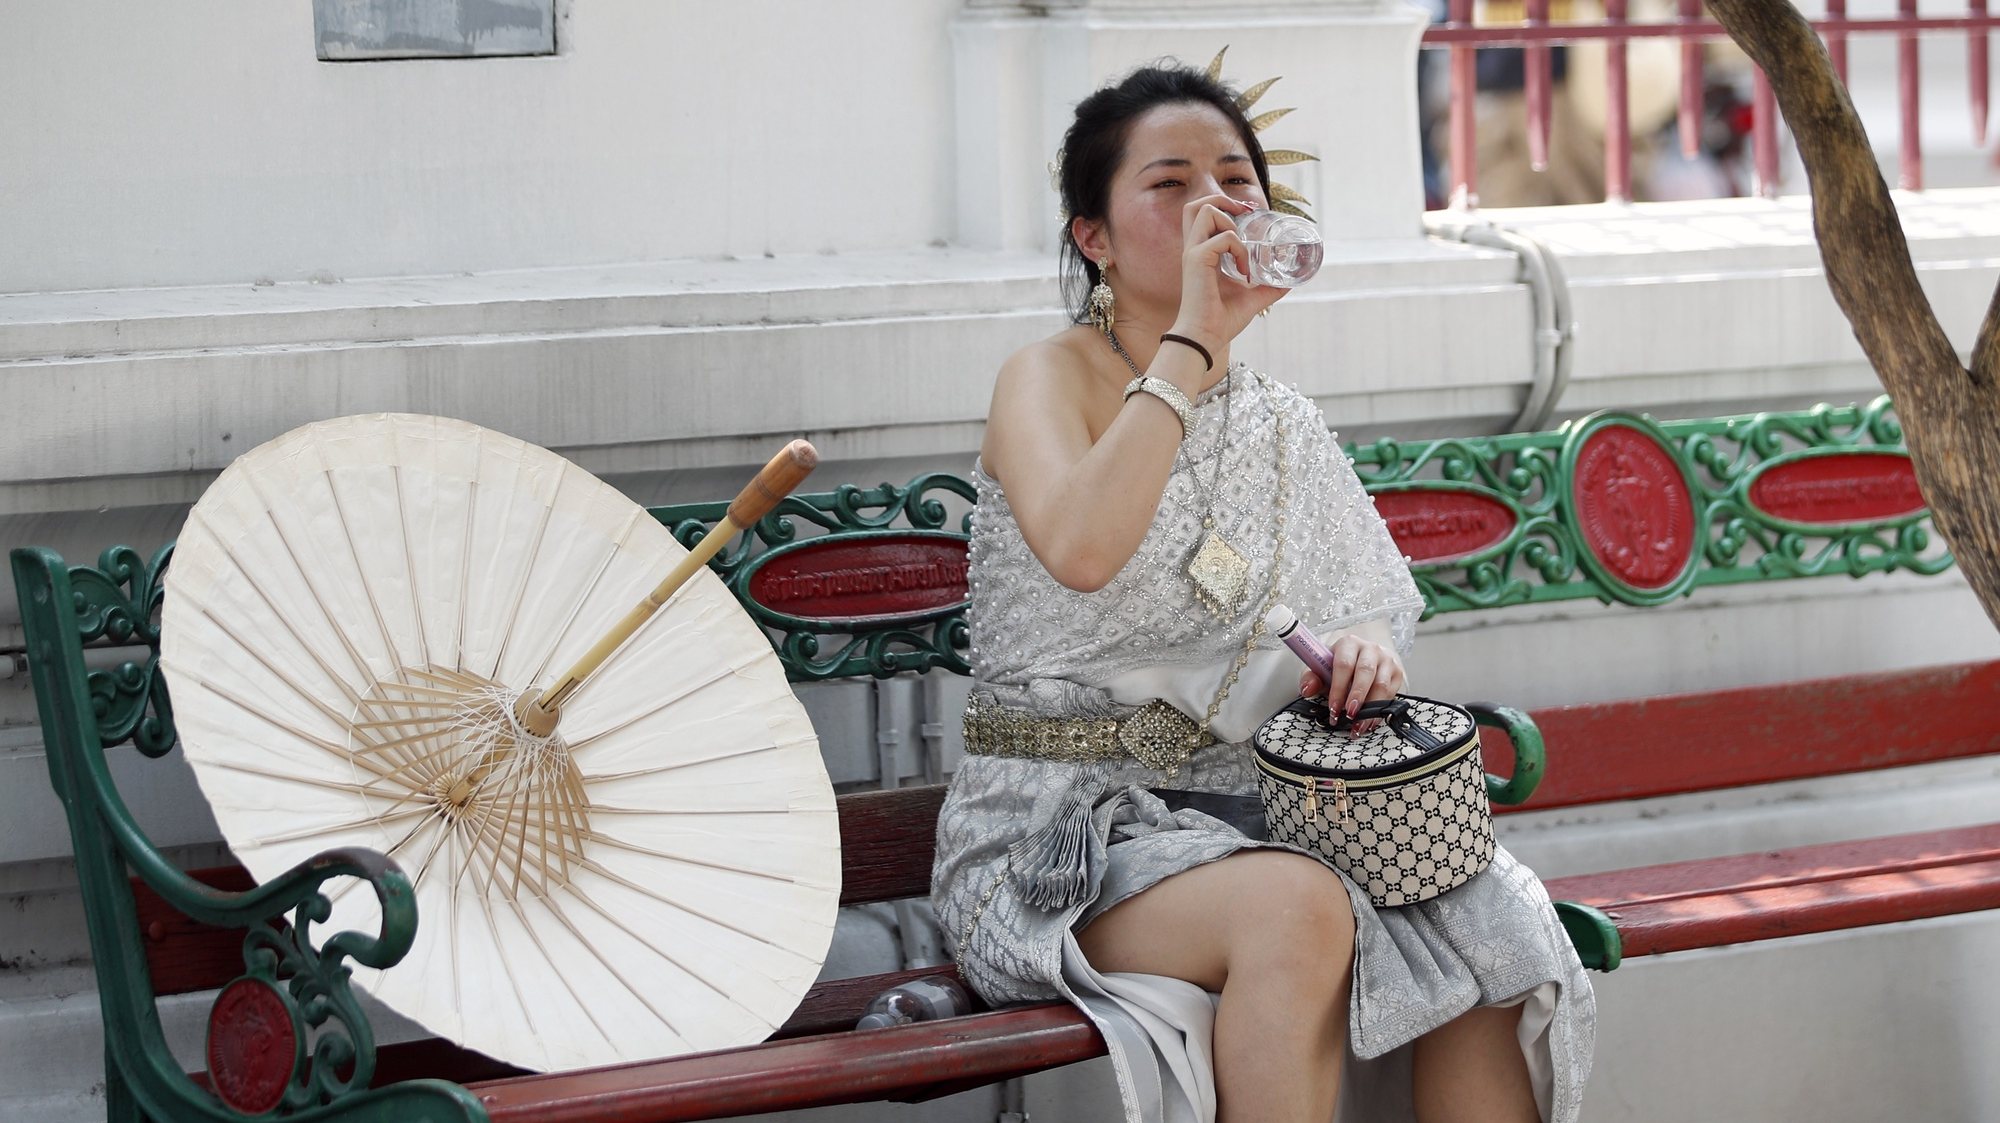 epa11321379 A Chinese tourist dressed in Thai traditional rented costume drinks water during hot weather at the Temple of Dawn or Wat Arun in Bangkok, Thailand, 06 May 2024. Thailand is facing a severe heatwave as the Thai Meteorological Department warned about the extremely hot weather with temperatures soaring to record highs over 44 degrees Celsius in some areas and advised the public to avoid prolonged outdoor activities from a highly dangerous heat level index that directly hazardously affects health conditions. A total of 38 people have been reported dead of heatstroke in Thailand from February to May 2024, according to Dr Atthapol Kaewsamrit, Deputy Director-General of the Health Department. The United Nations revealed in its recent report that Asia was identified as the global disaster center and anticipated to be significantly affected by climate related disruptions such as extreme temperatures, severe heatwave, floods, storms and melting glaciers.  EPA/RUNGROJ YONGRIT